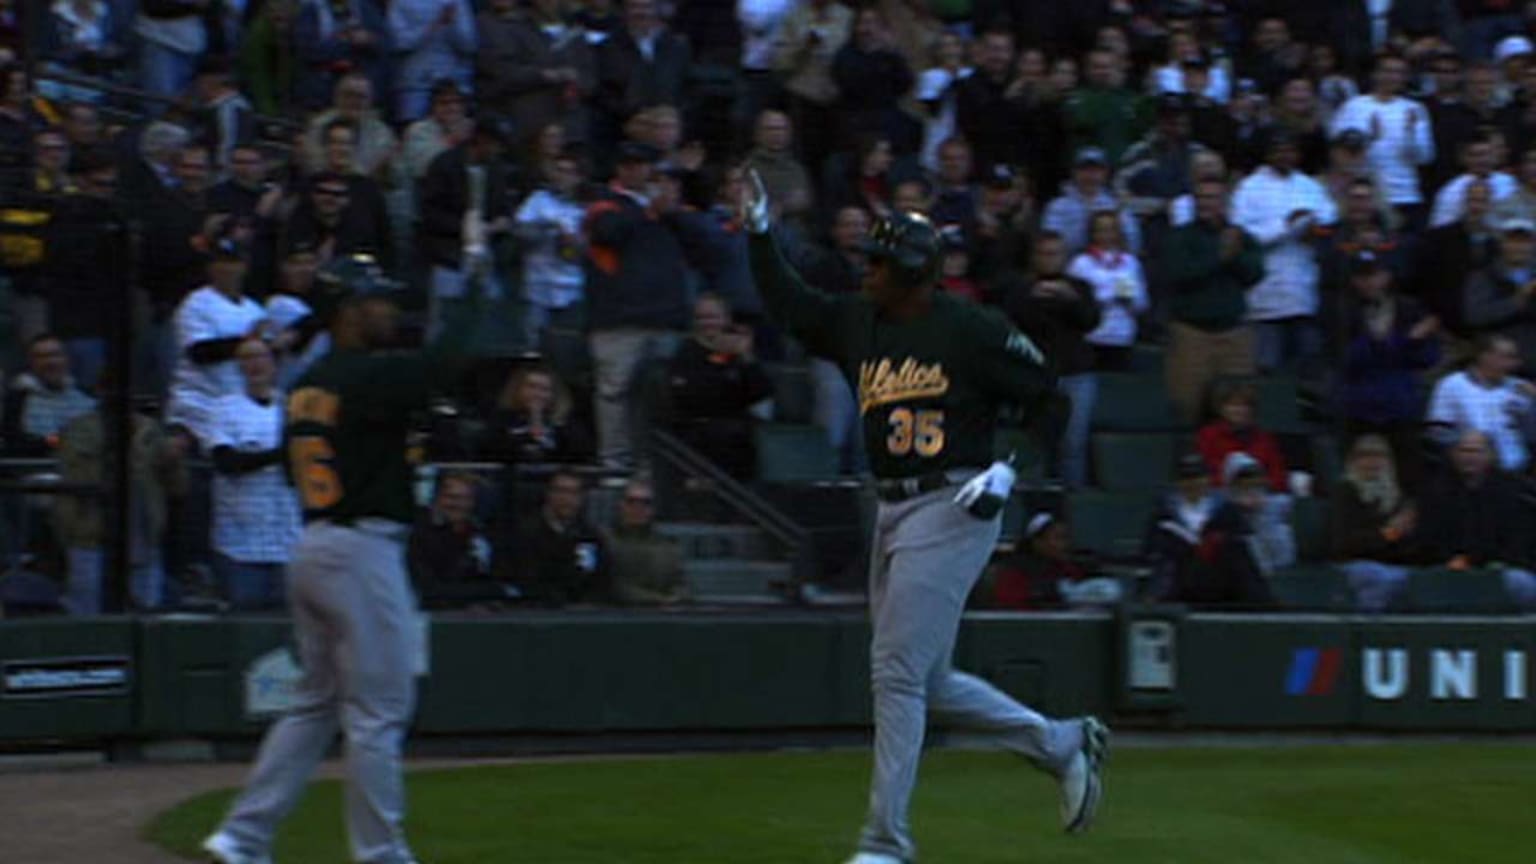 July 6, 2006: Frank Thomas' two-out, two-run HR in ninth lifts A's over  Angels